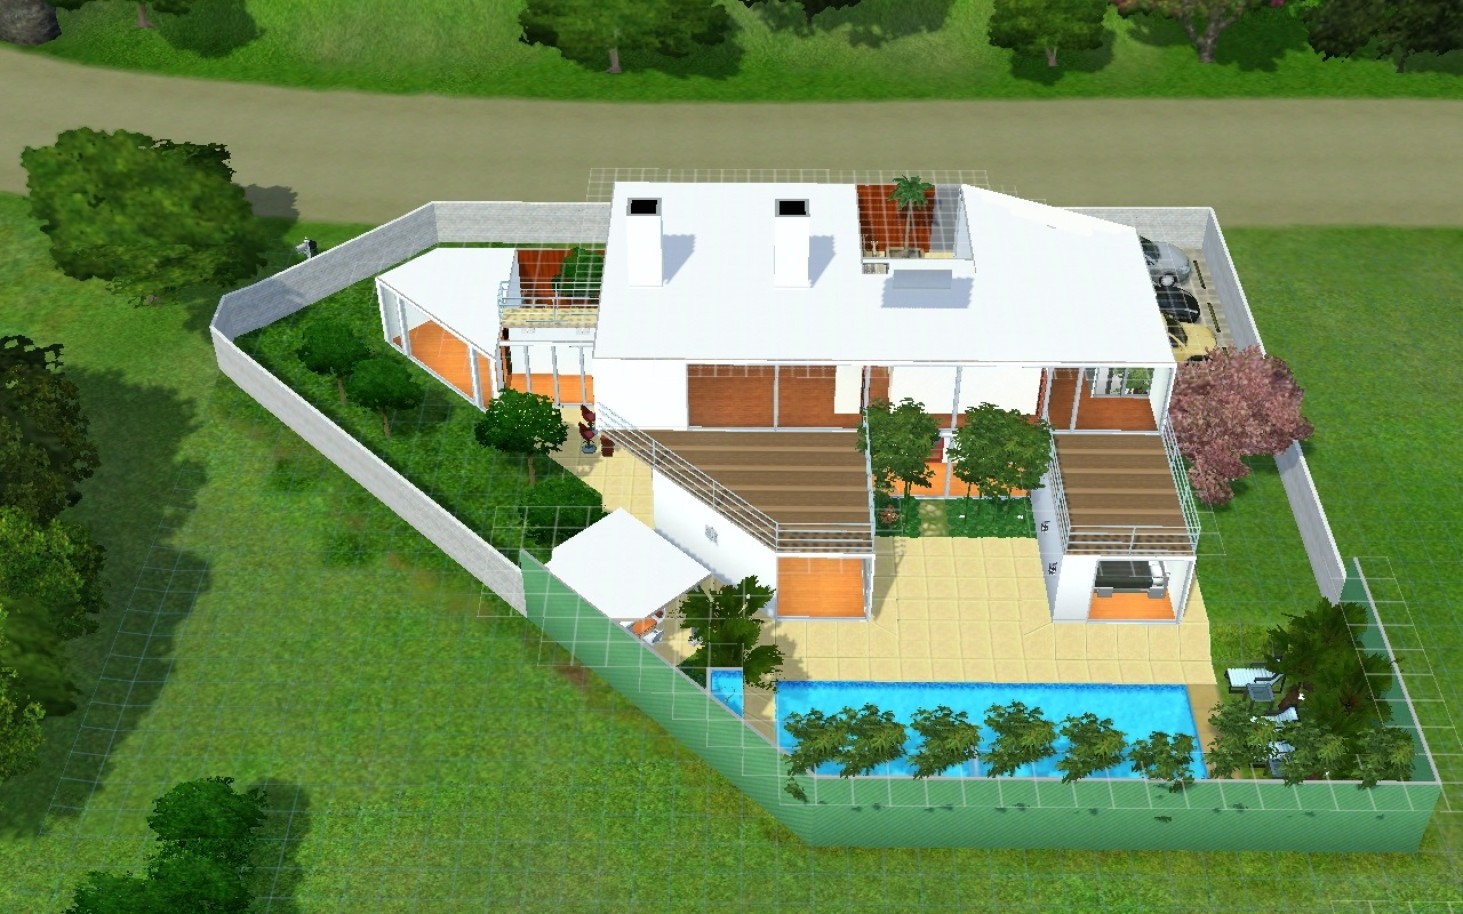 3 bedroom villa with pool and sea view, for sale in Guia, Algarve_244923